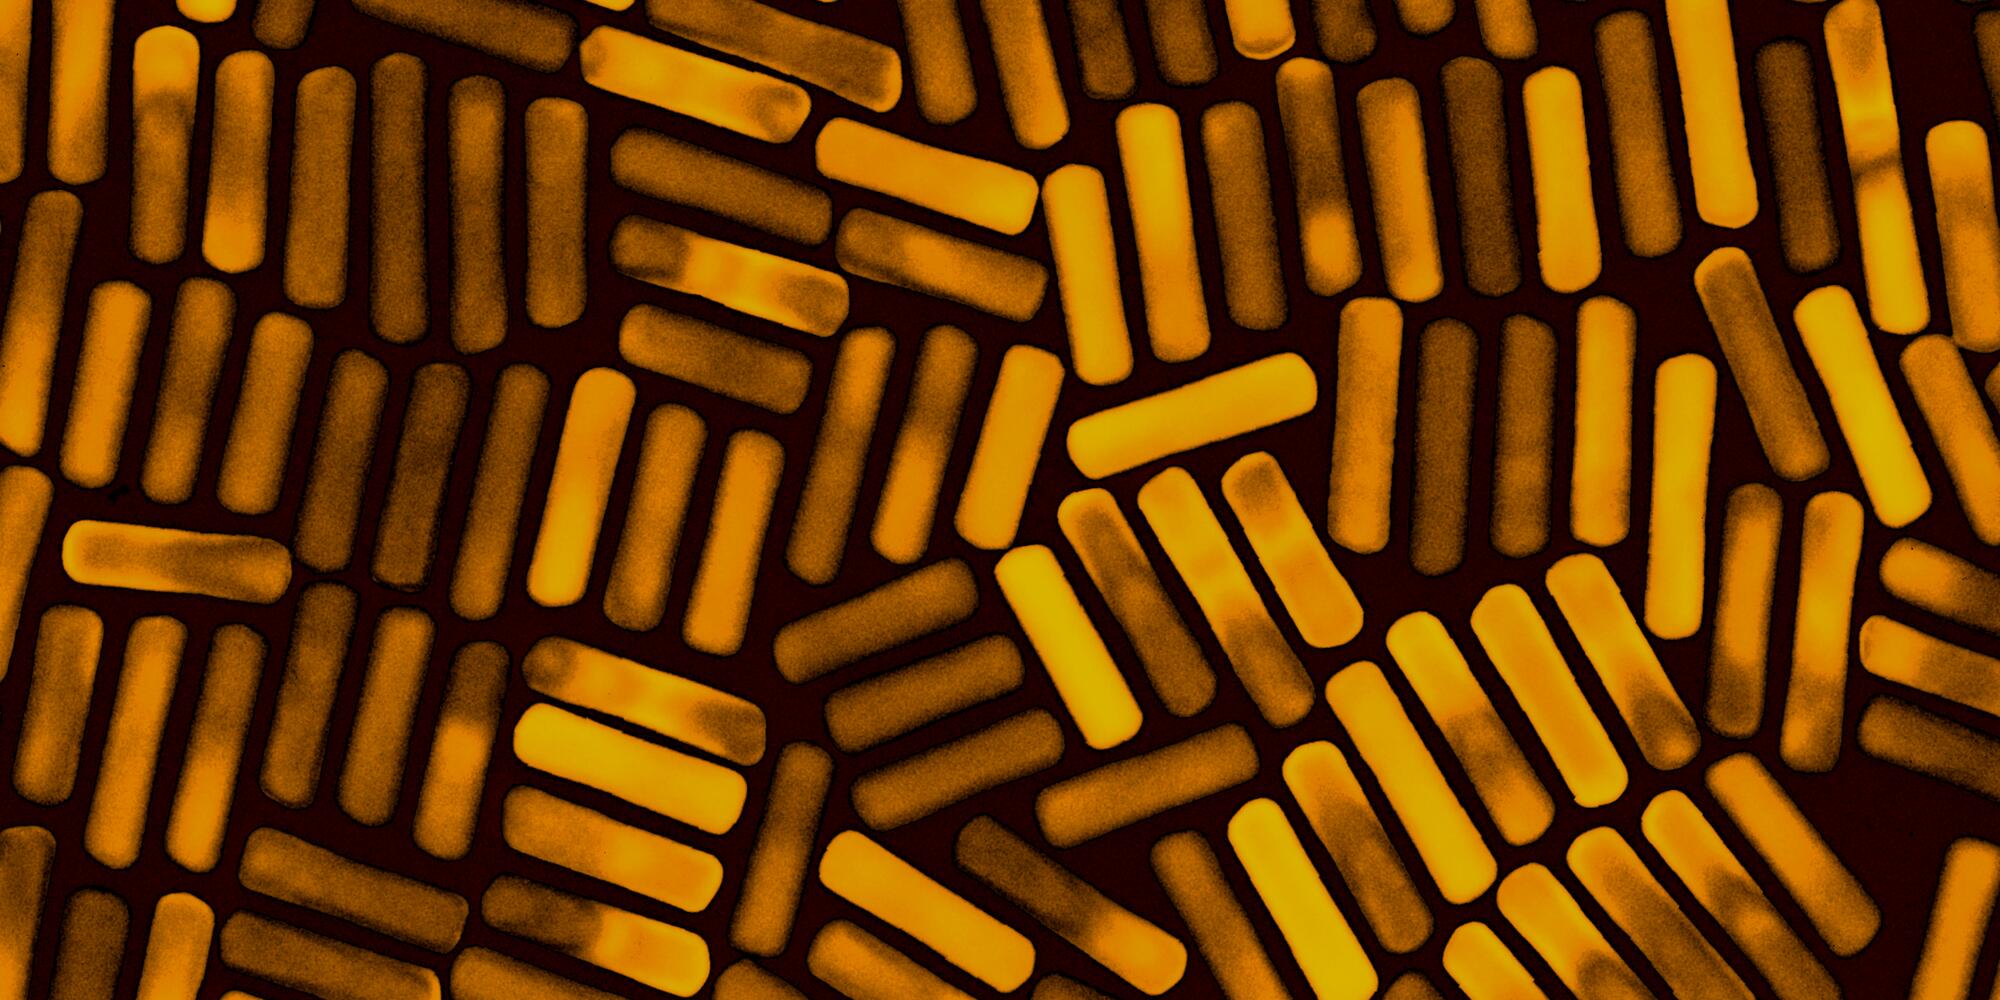 Image filled with rectangular shapes of golden-brown nanorods in a black background.